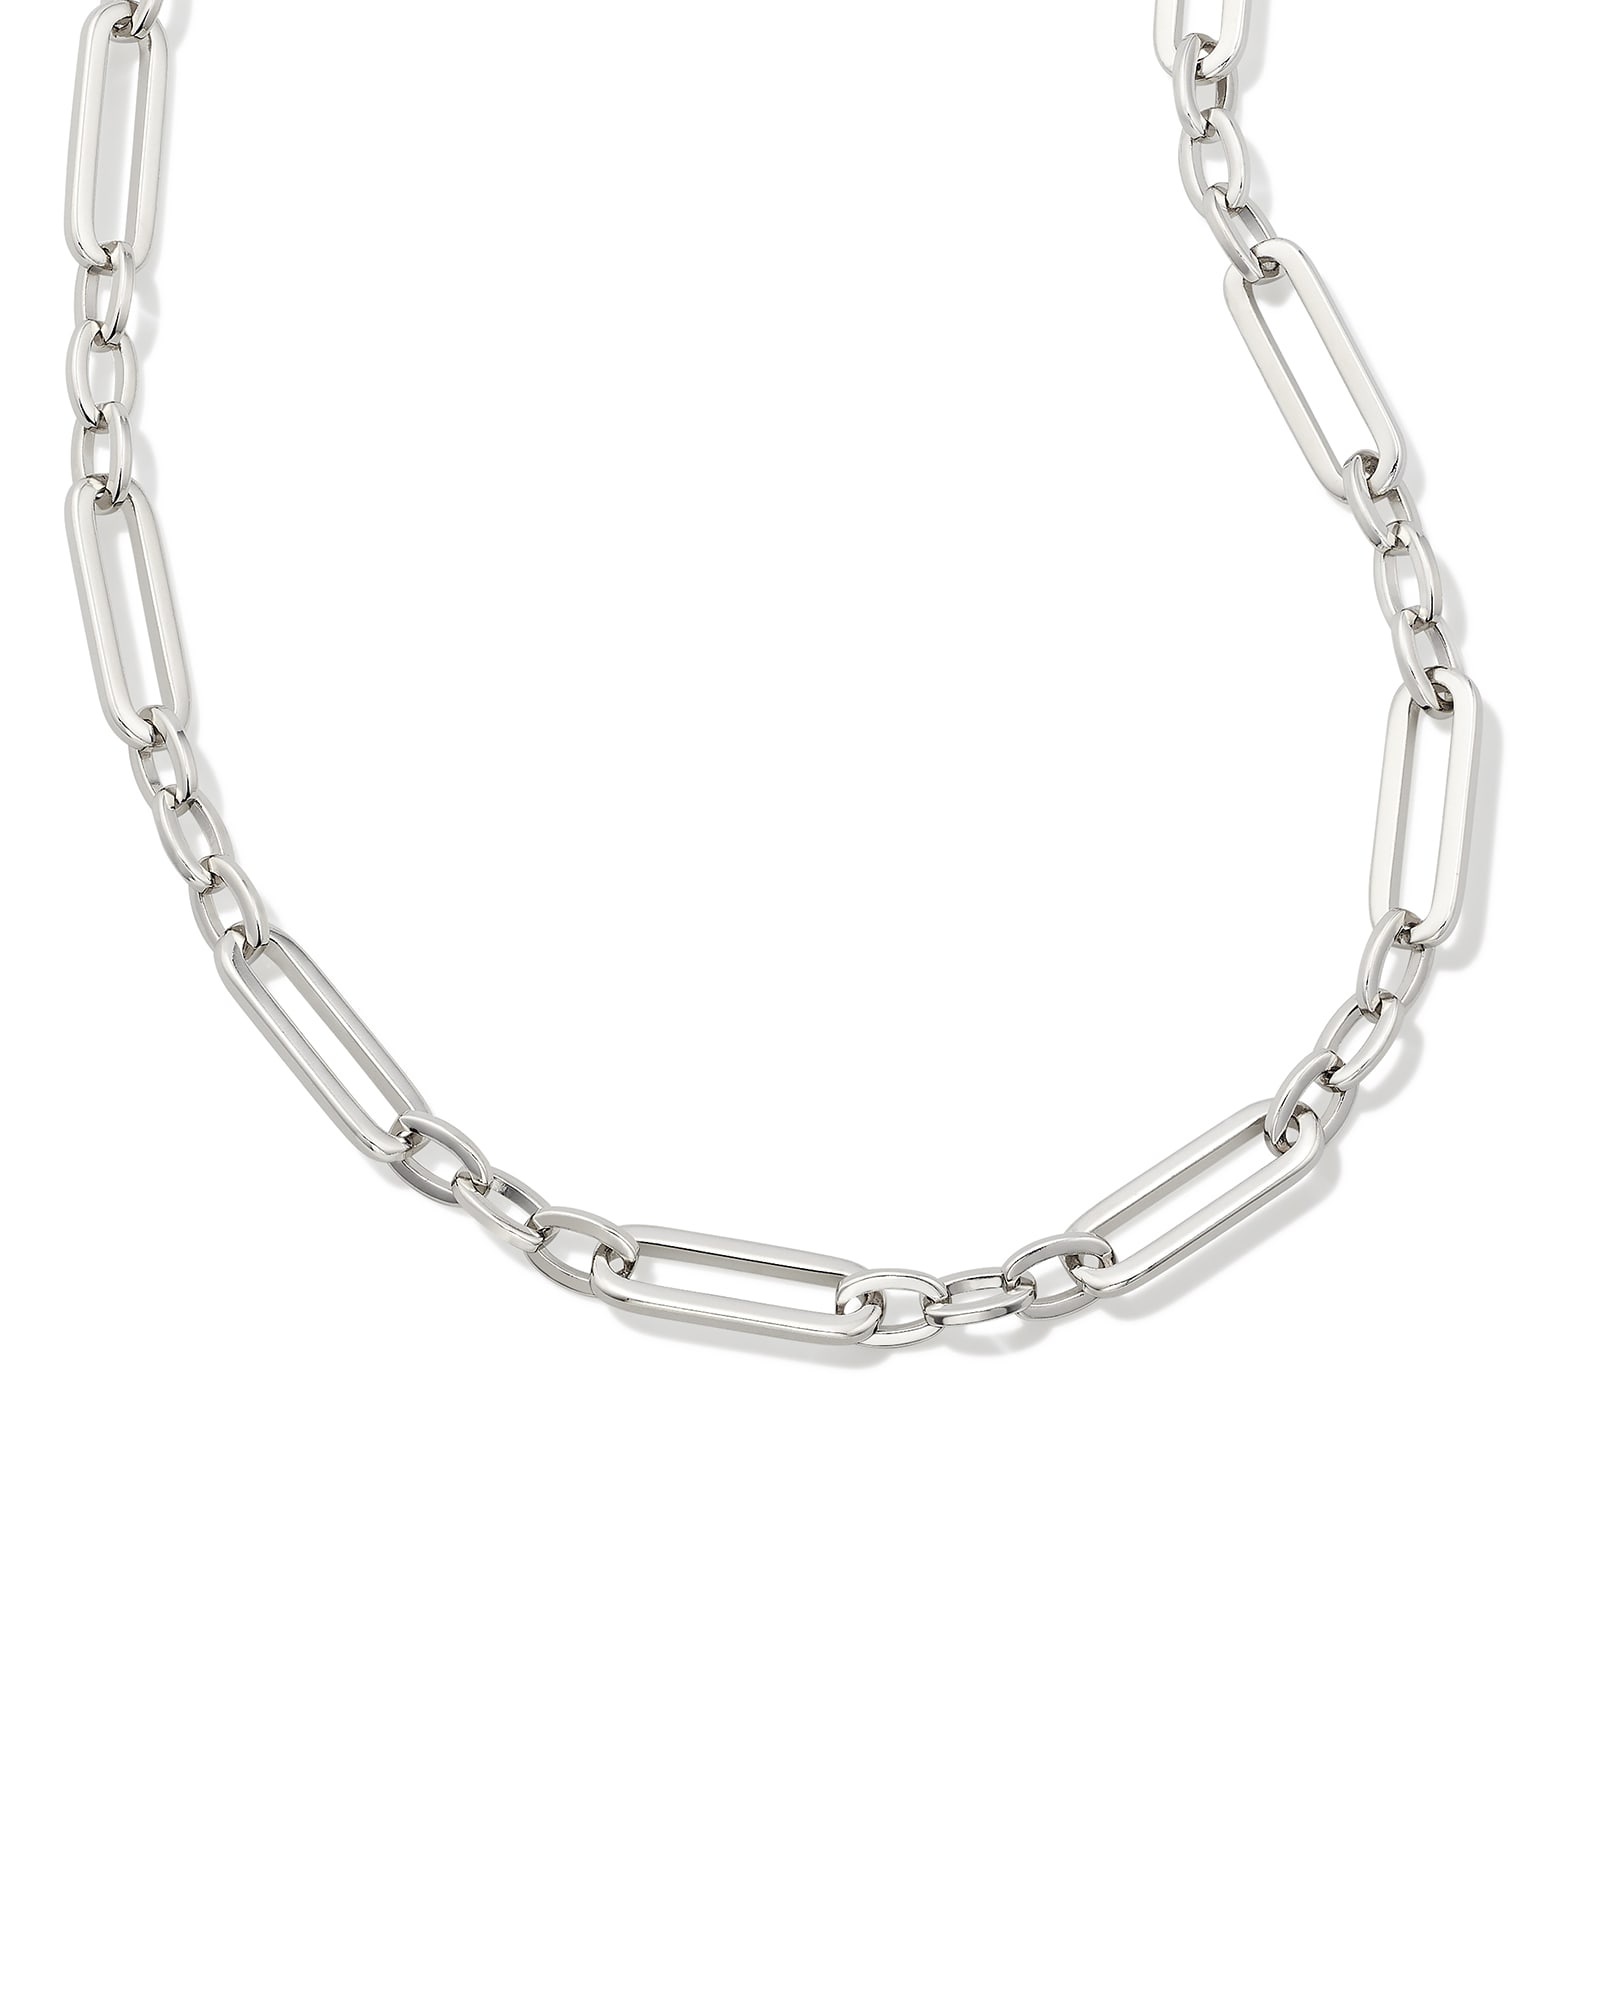 Kendra Scott Heather Link and Chain Necklace in Silver | Plated Brass/Metal Rhodium